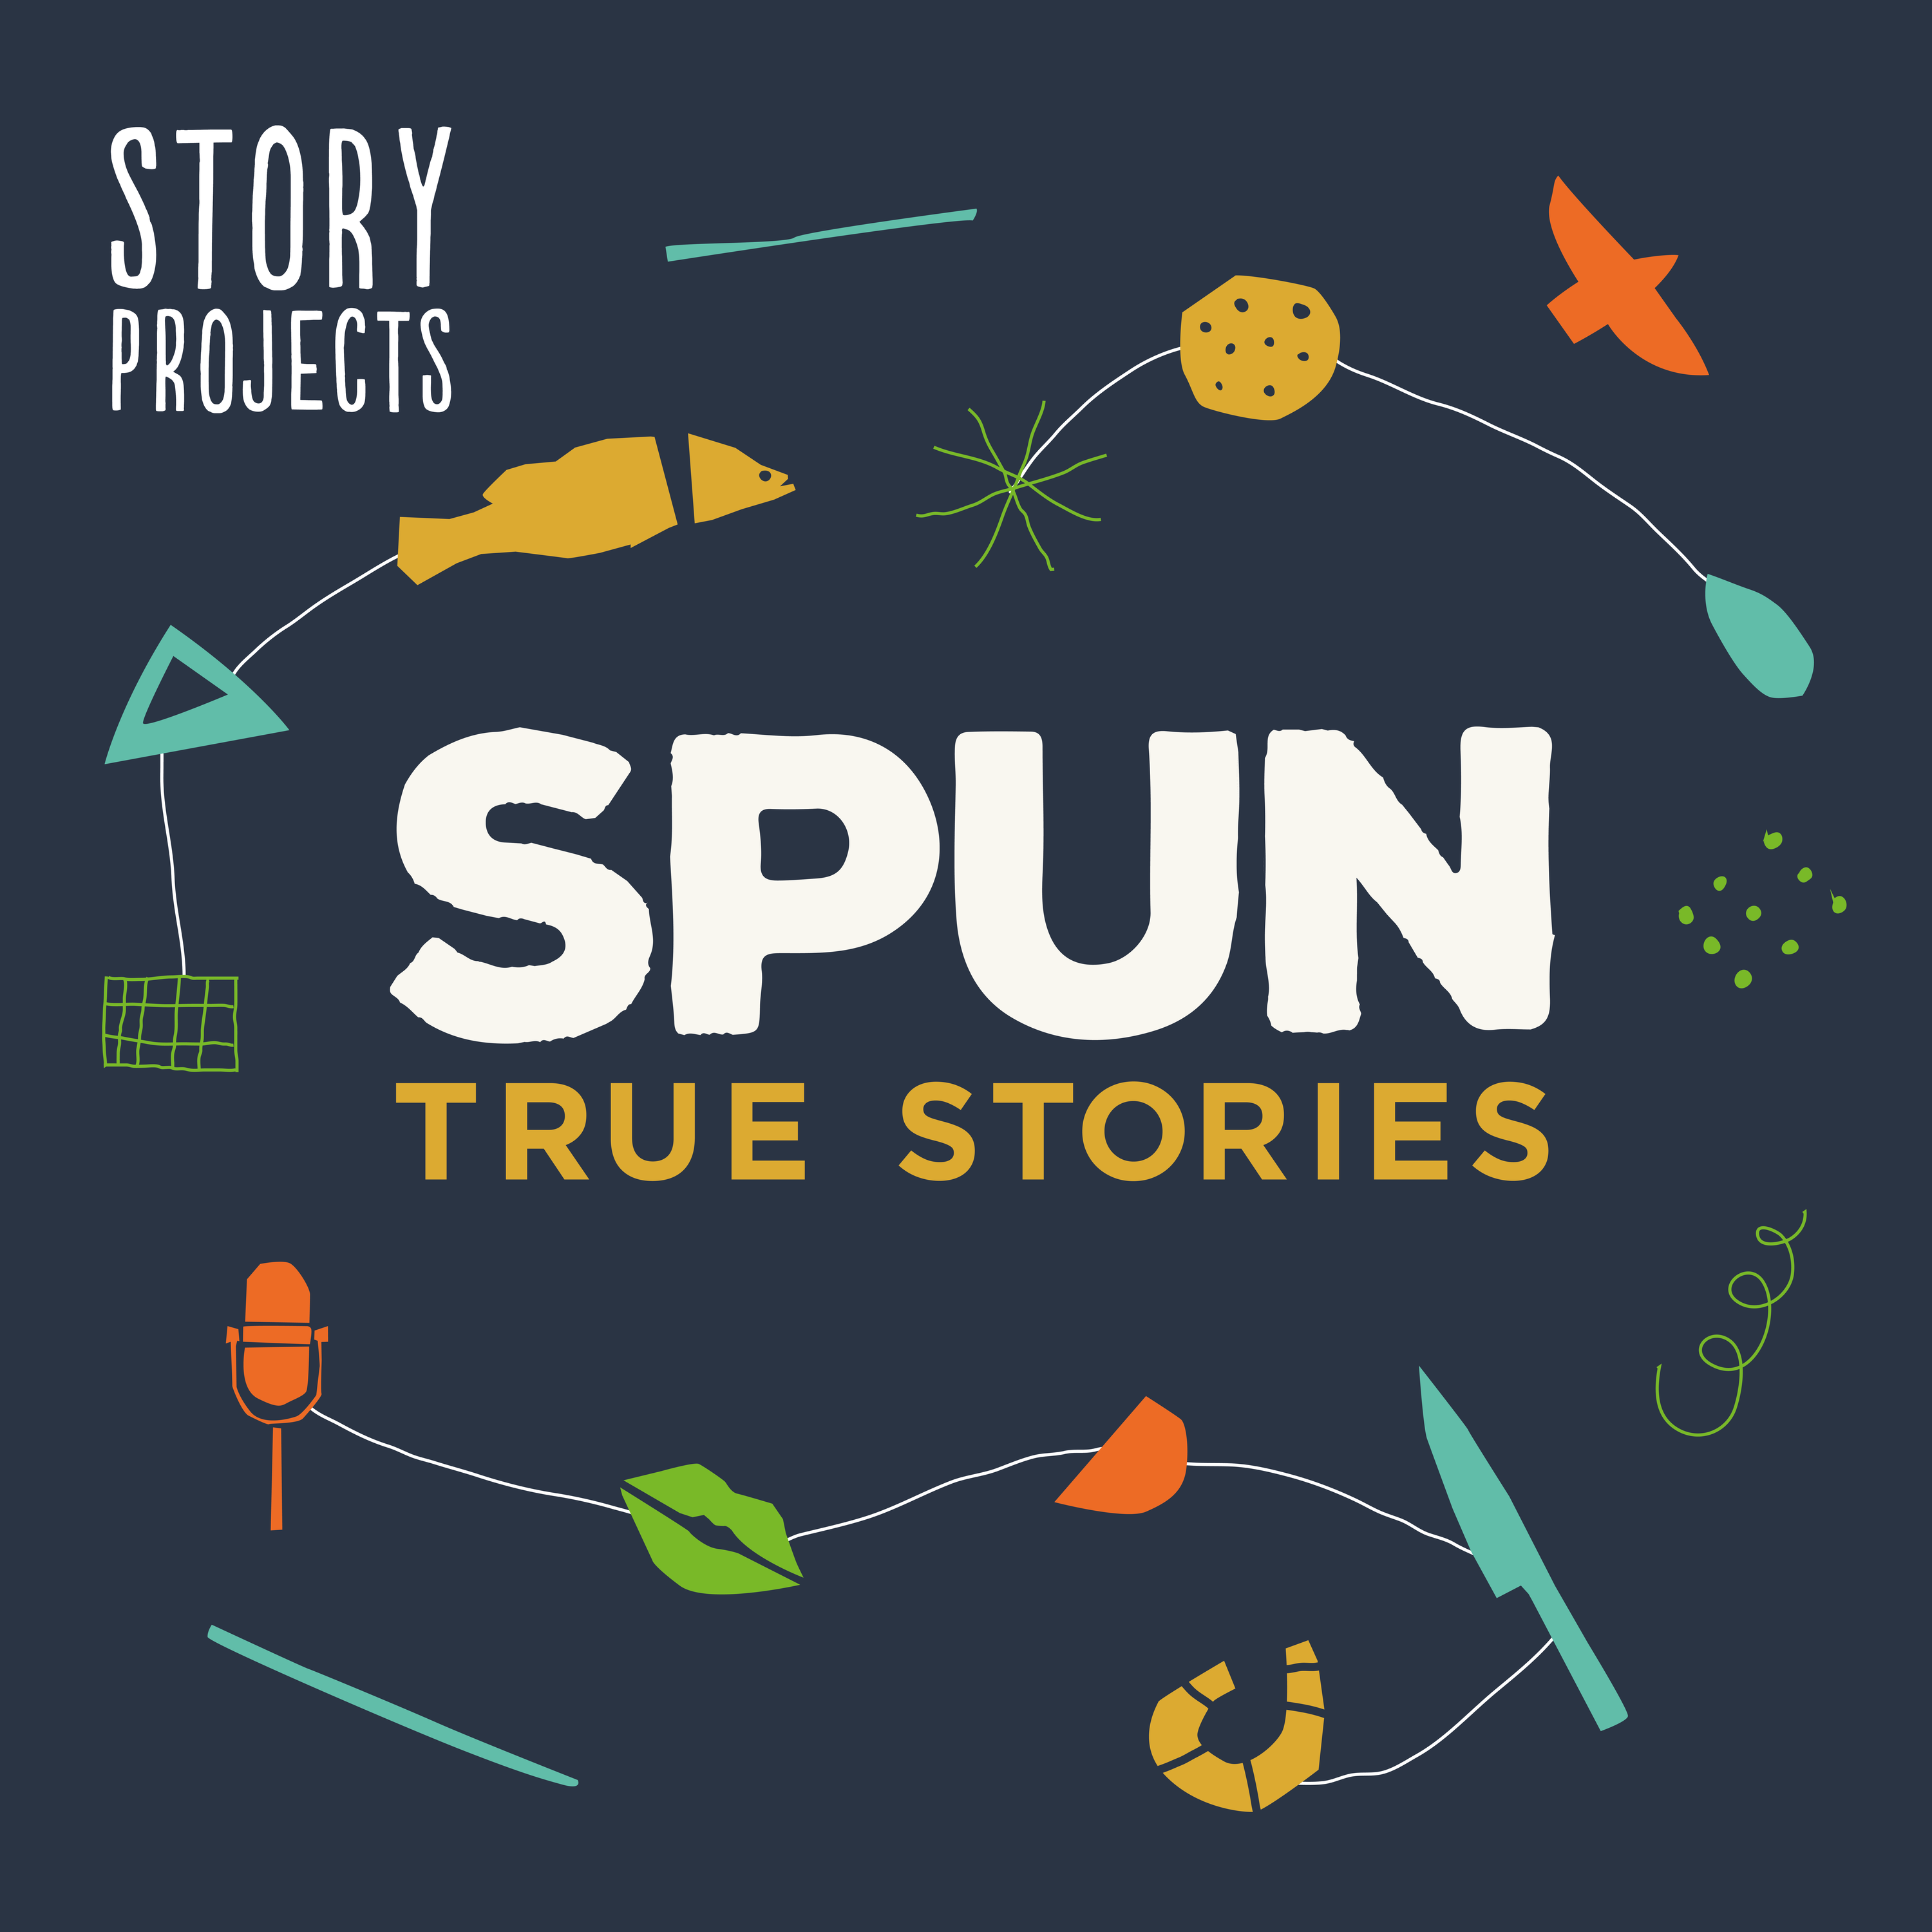 Ep7: Our Stories Are Connected